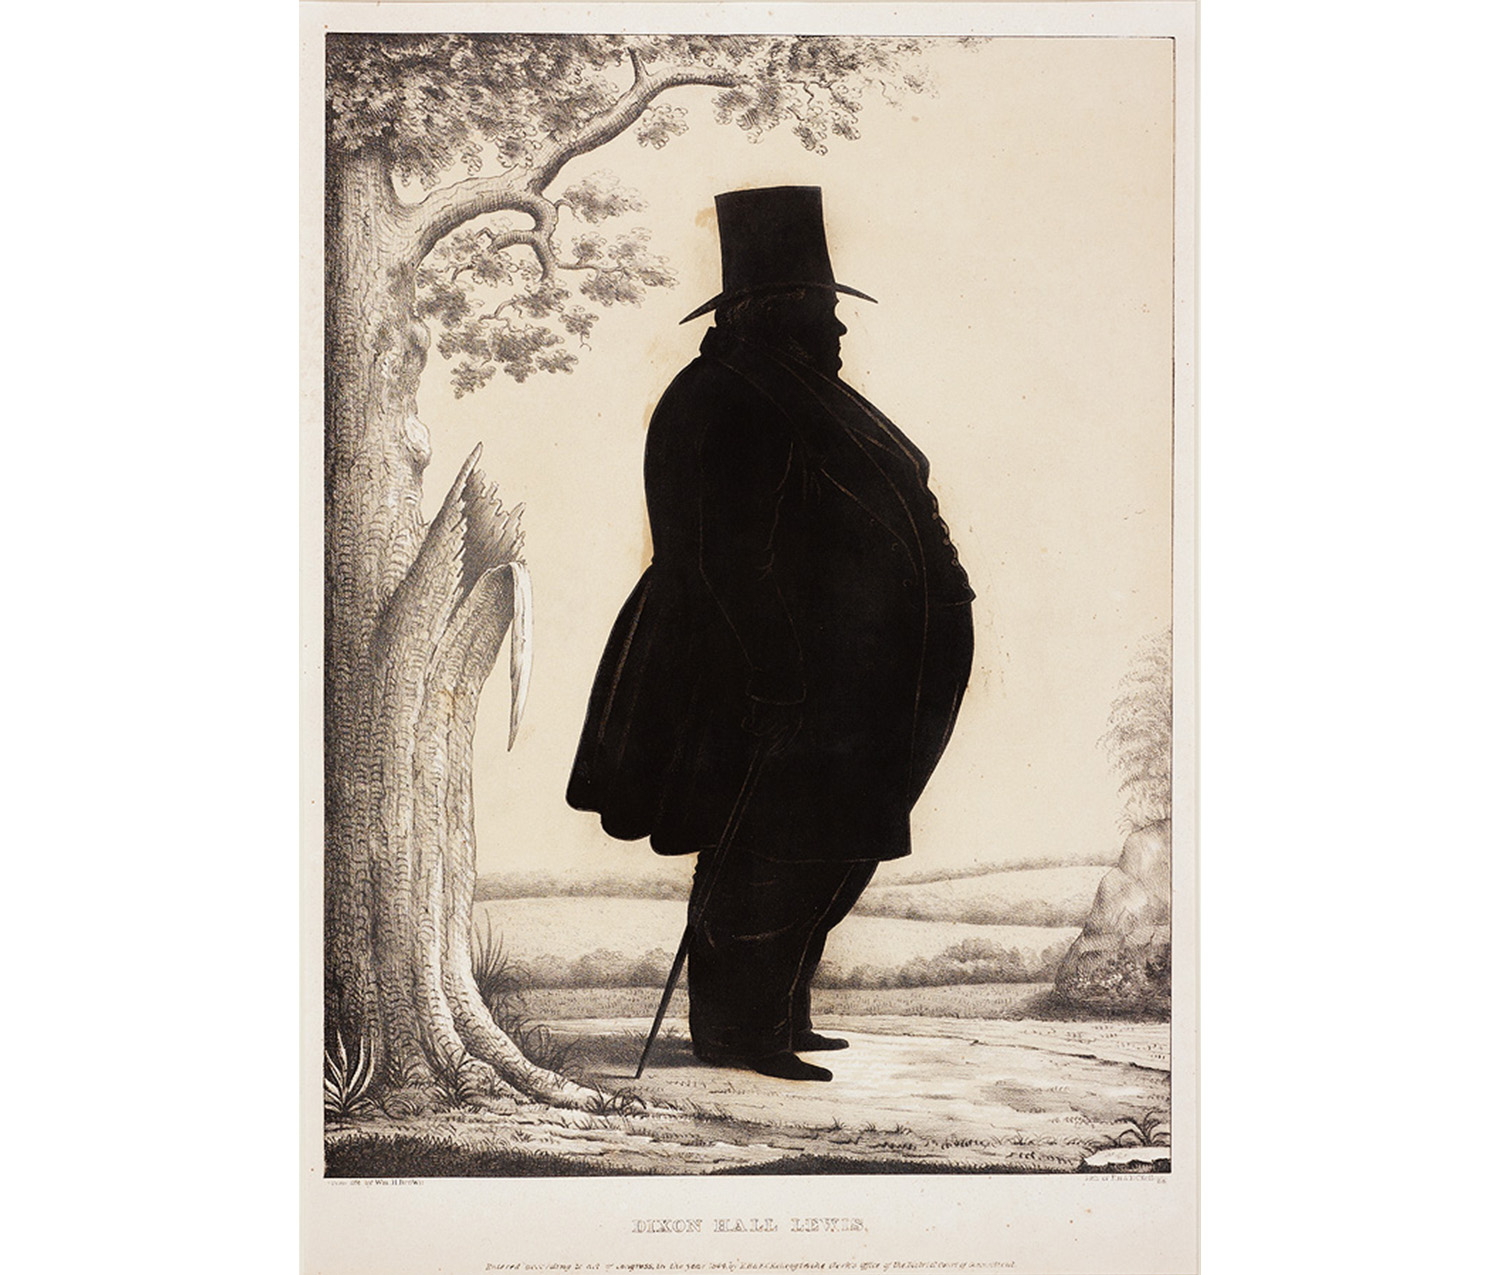 right profile full length silhouette portrait of a large, overweight man in black wearing long tailcoat, top hat, and cane standing outdoors near a tree with bucolic landscape in background